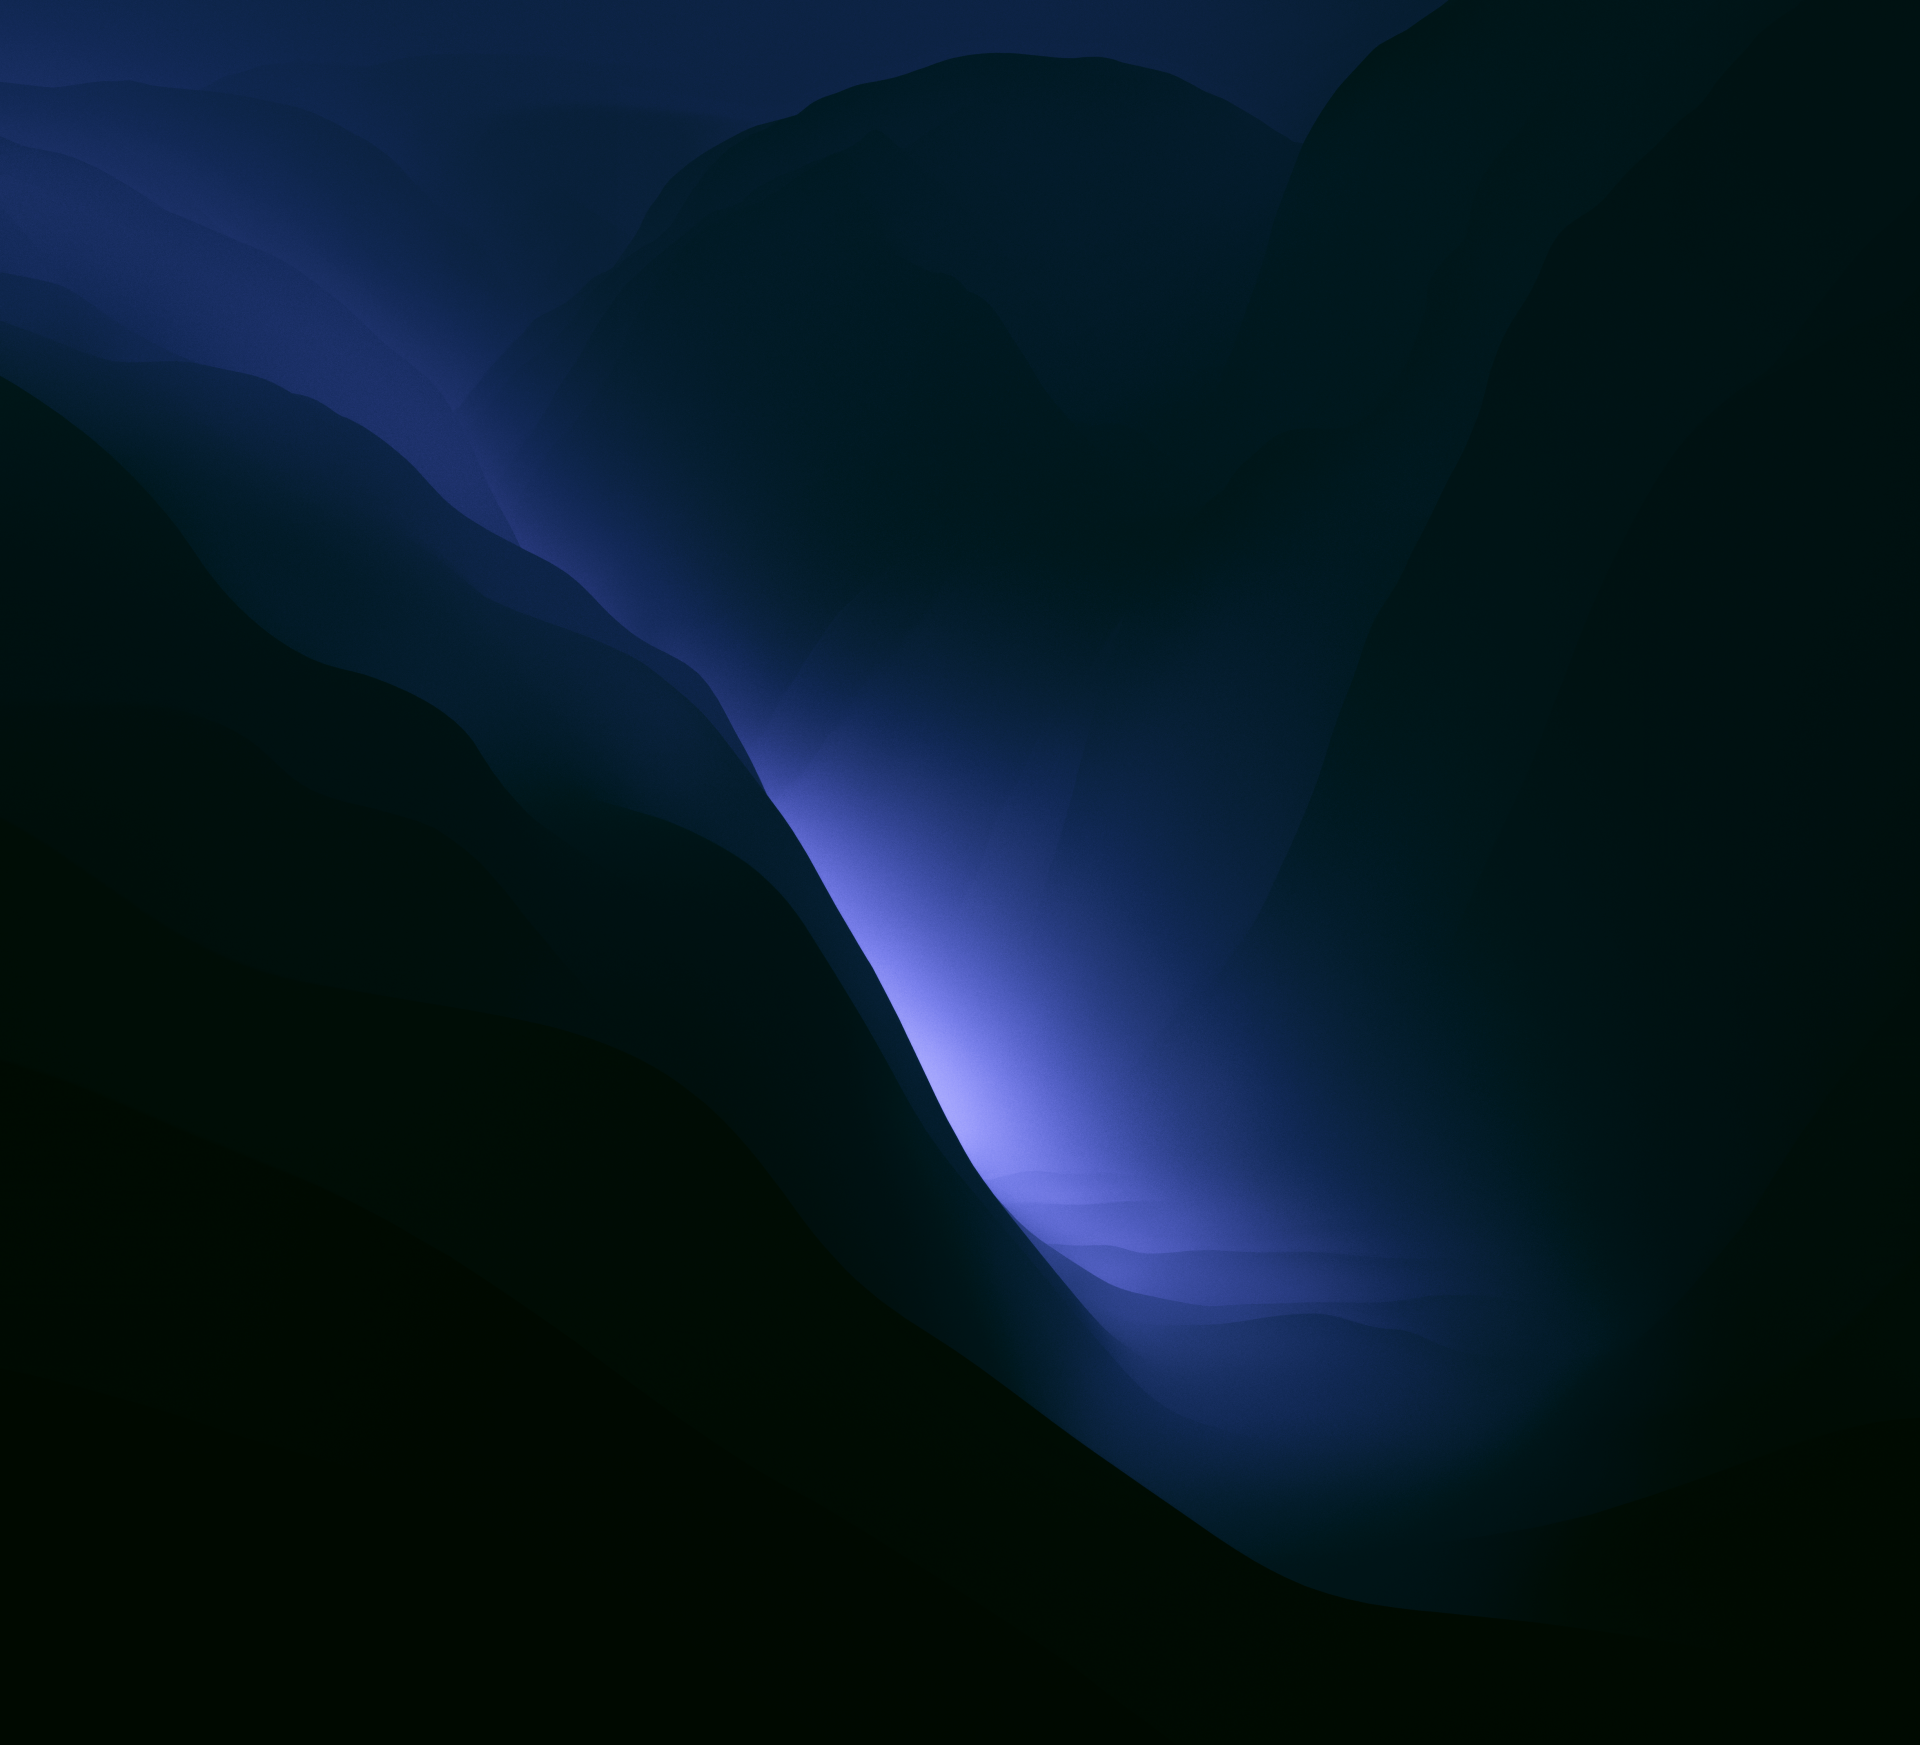 macOS Monterey inspired Waves wallpapers for iPhone